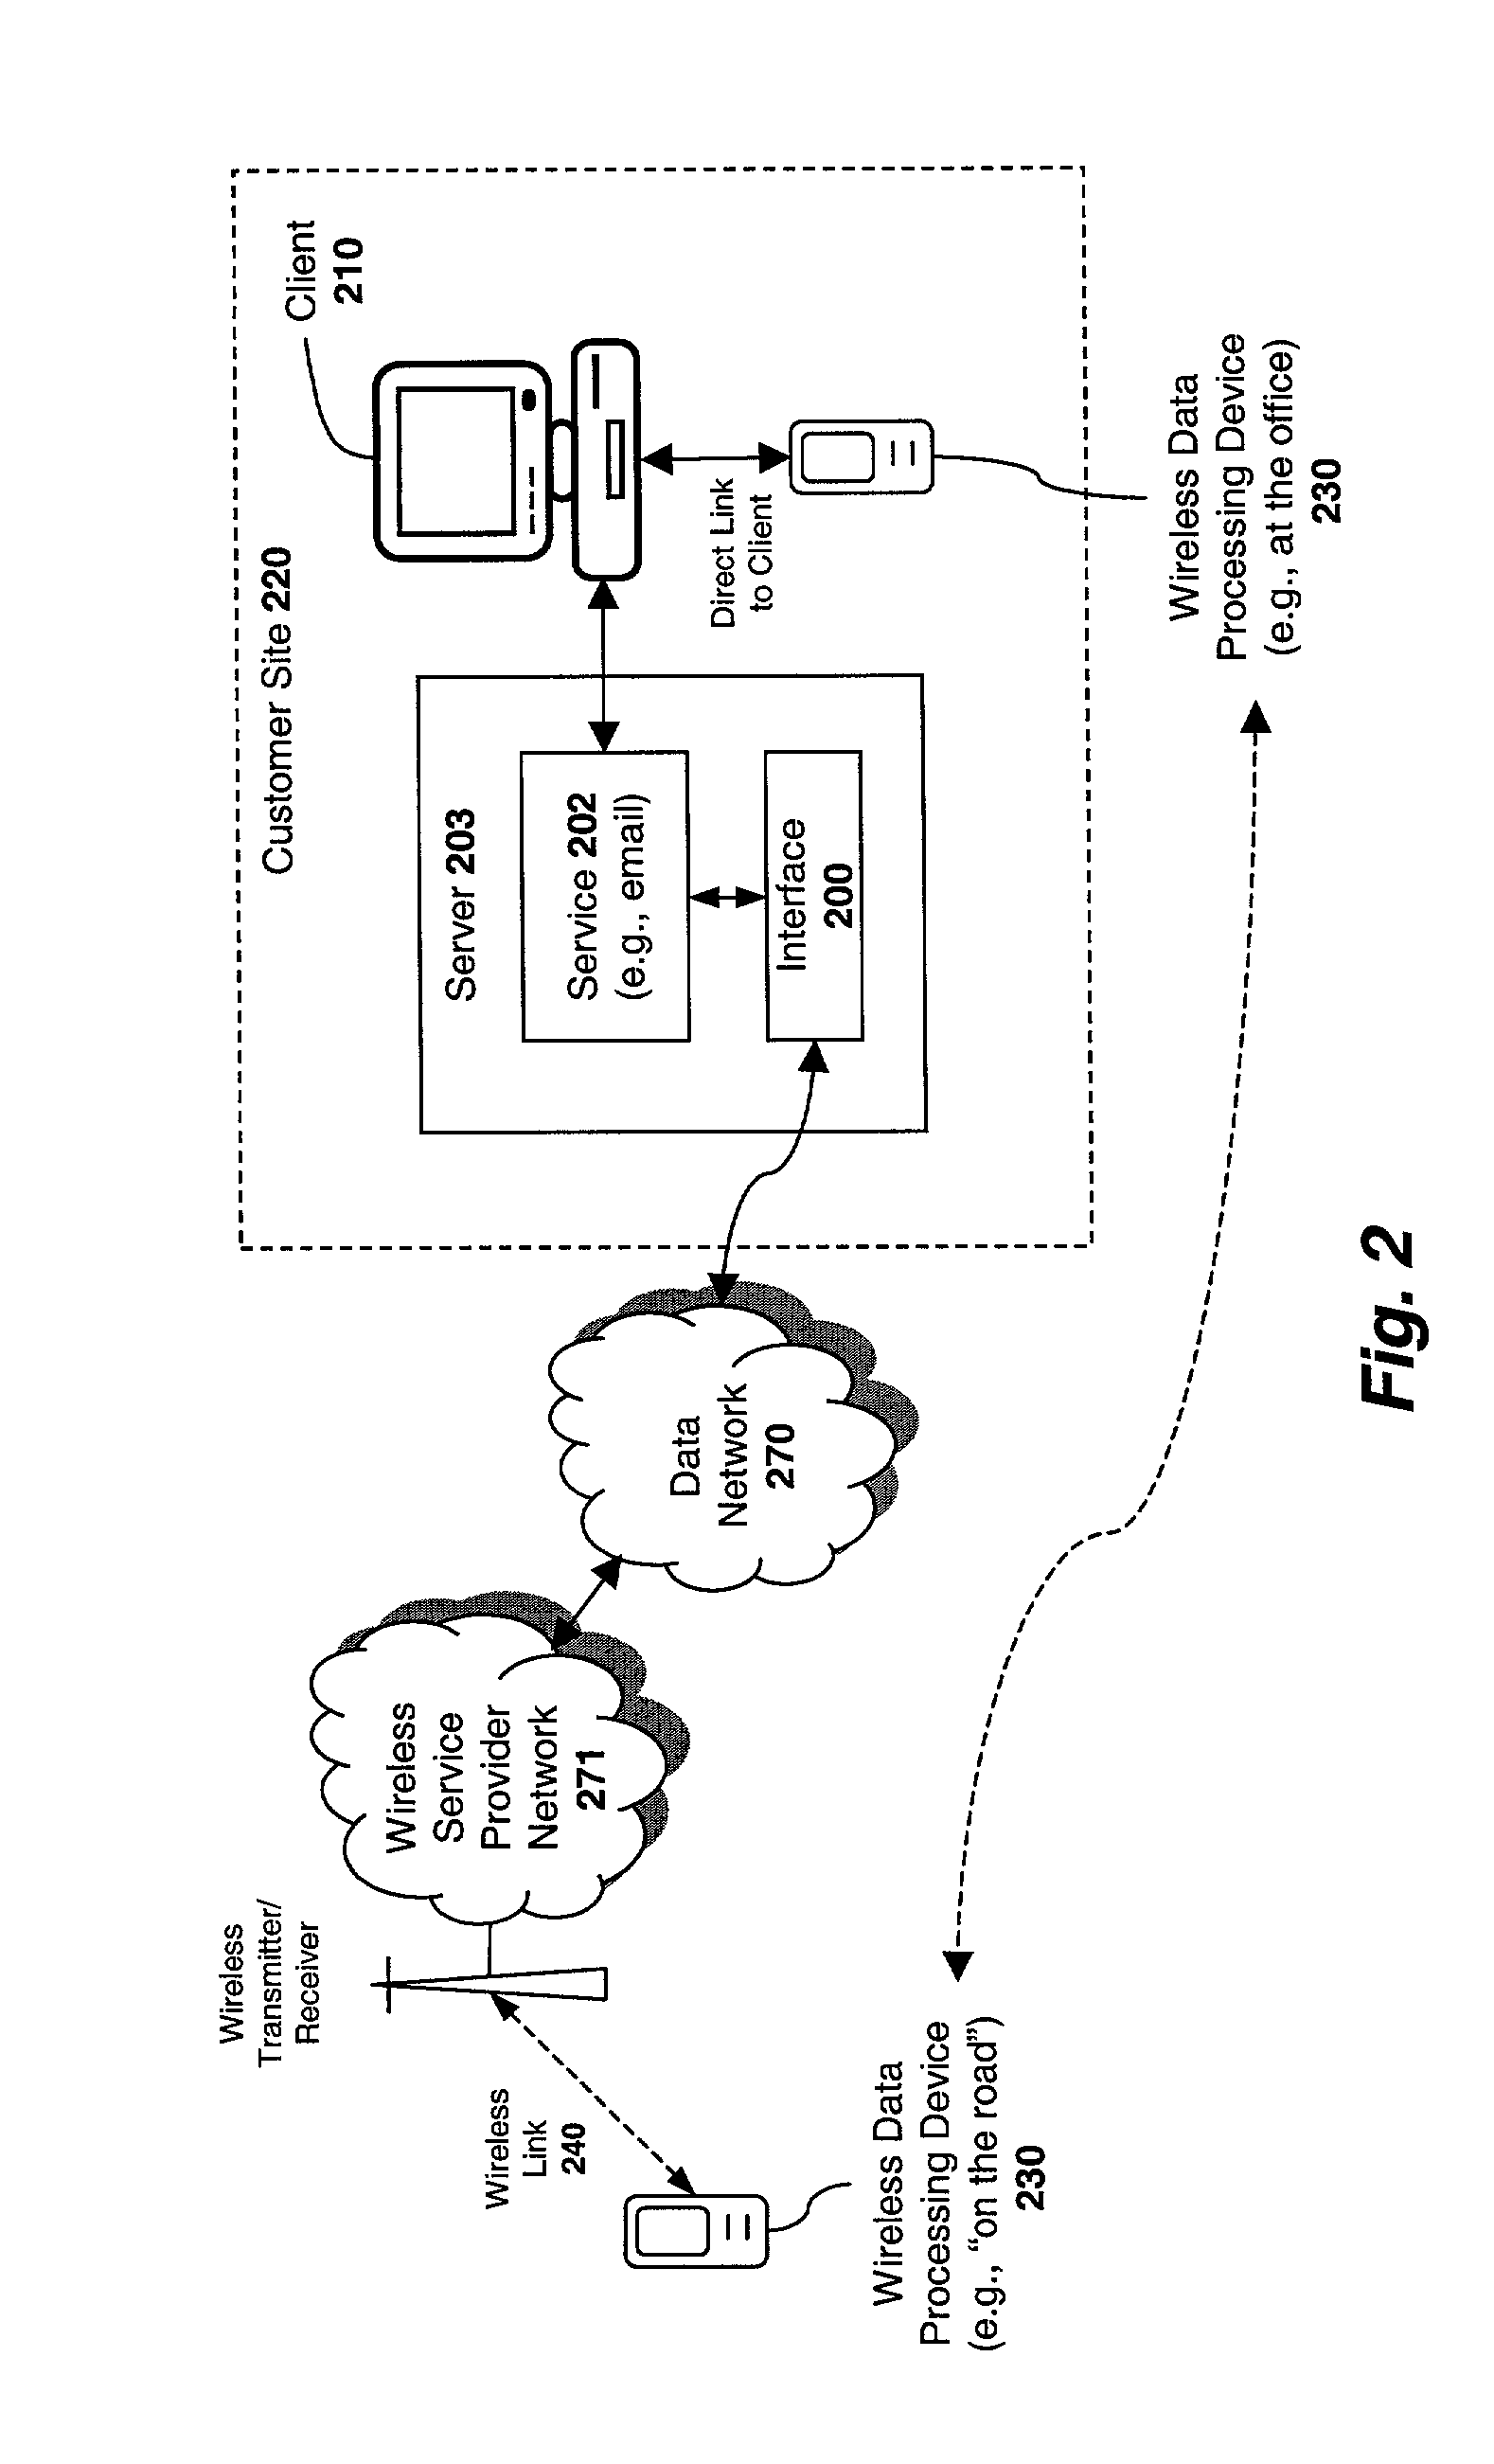 Apparatus and method for manipulating transmission power in a wireless communication device